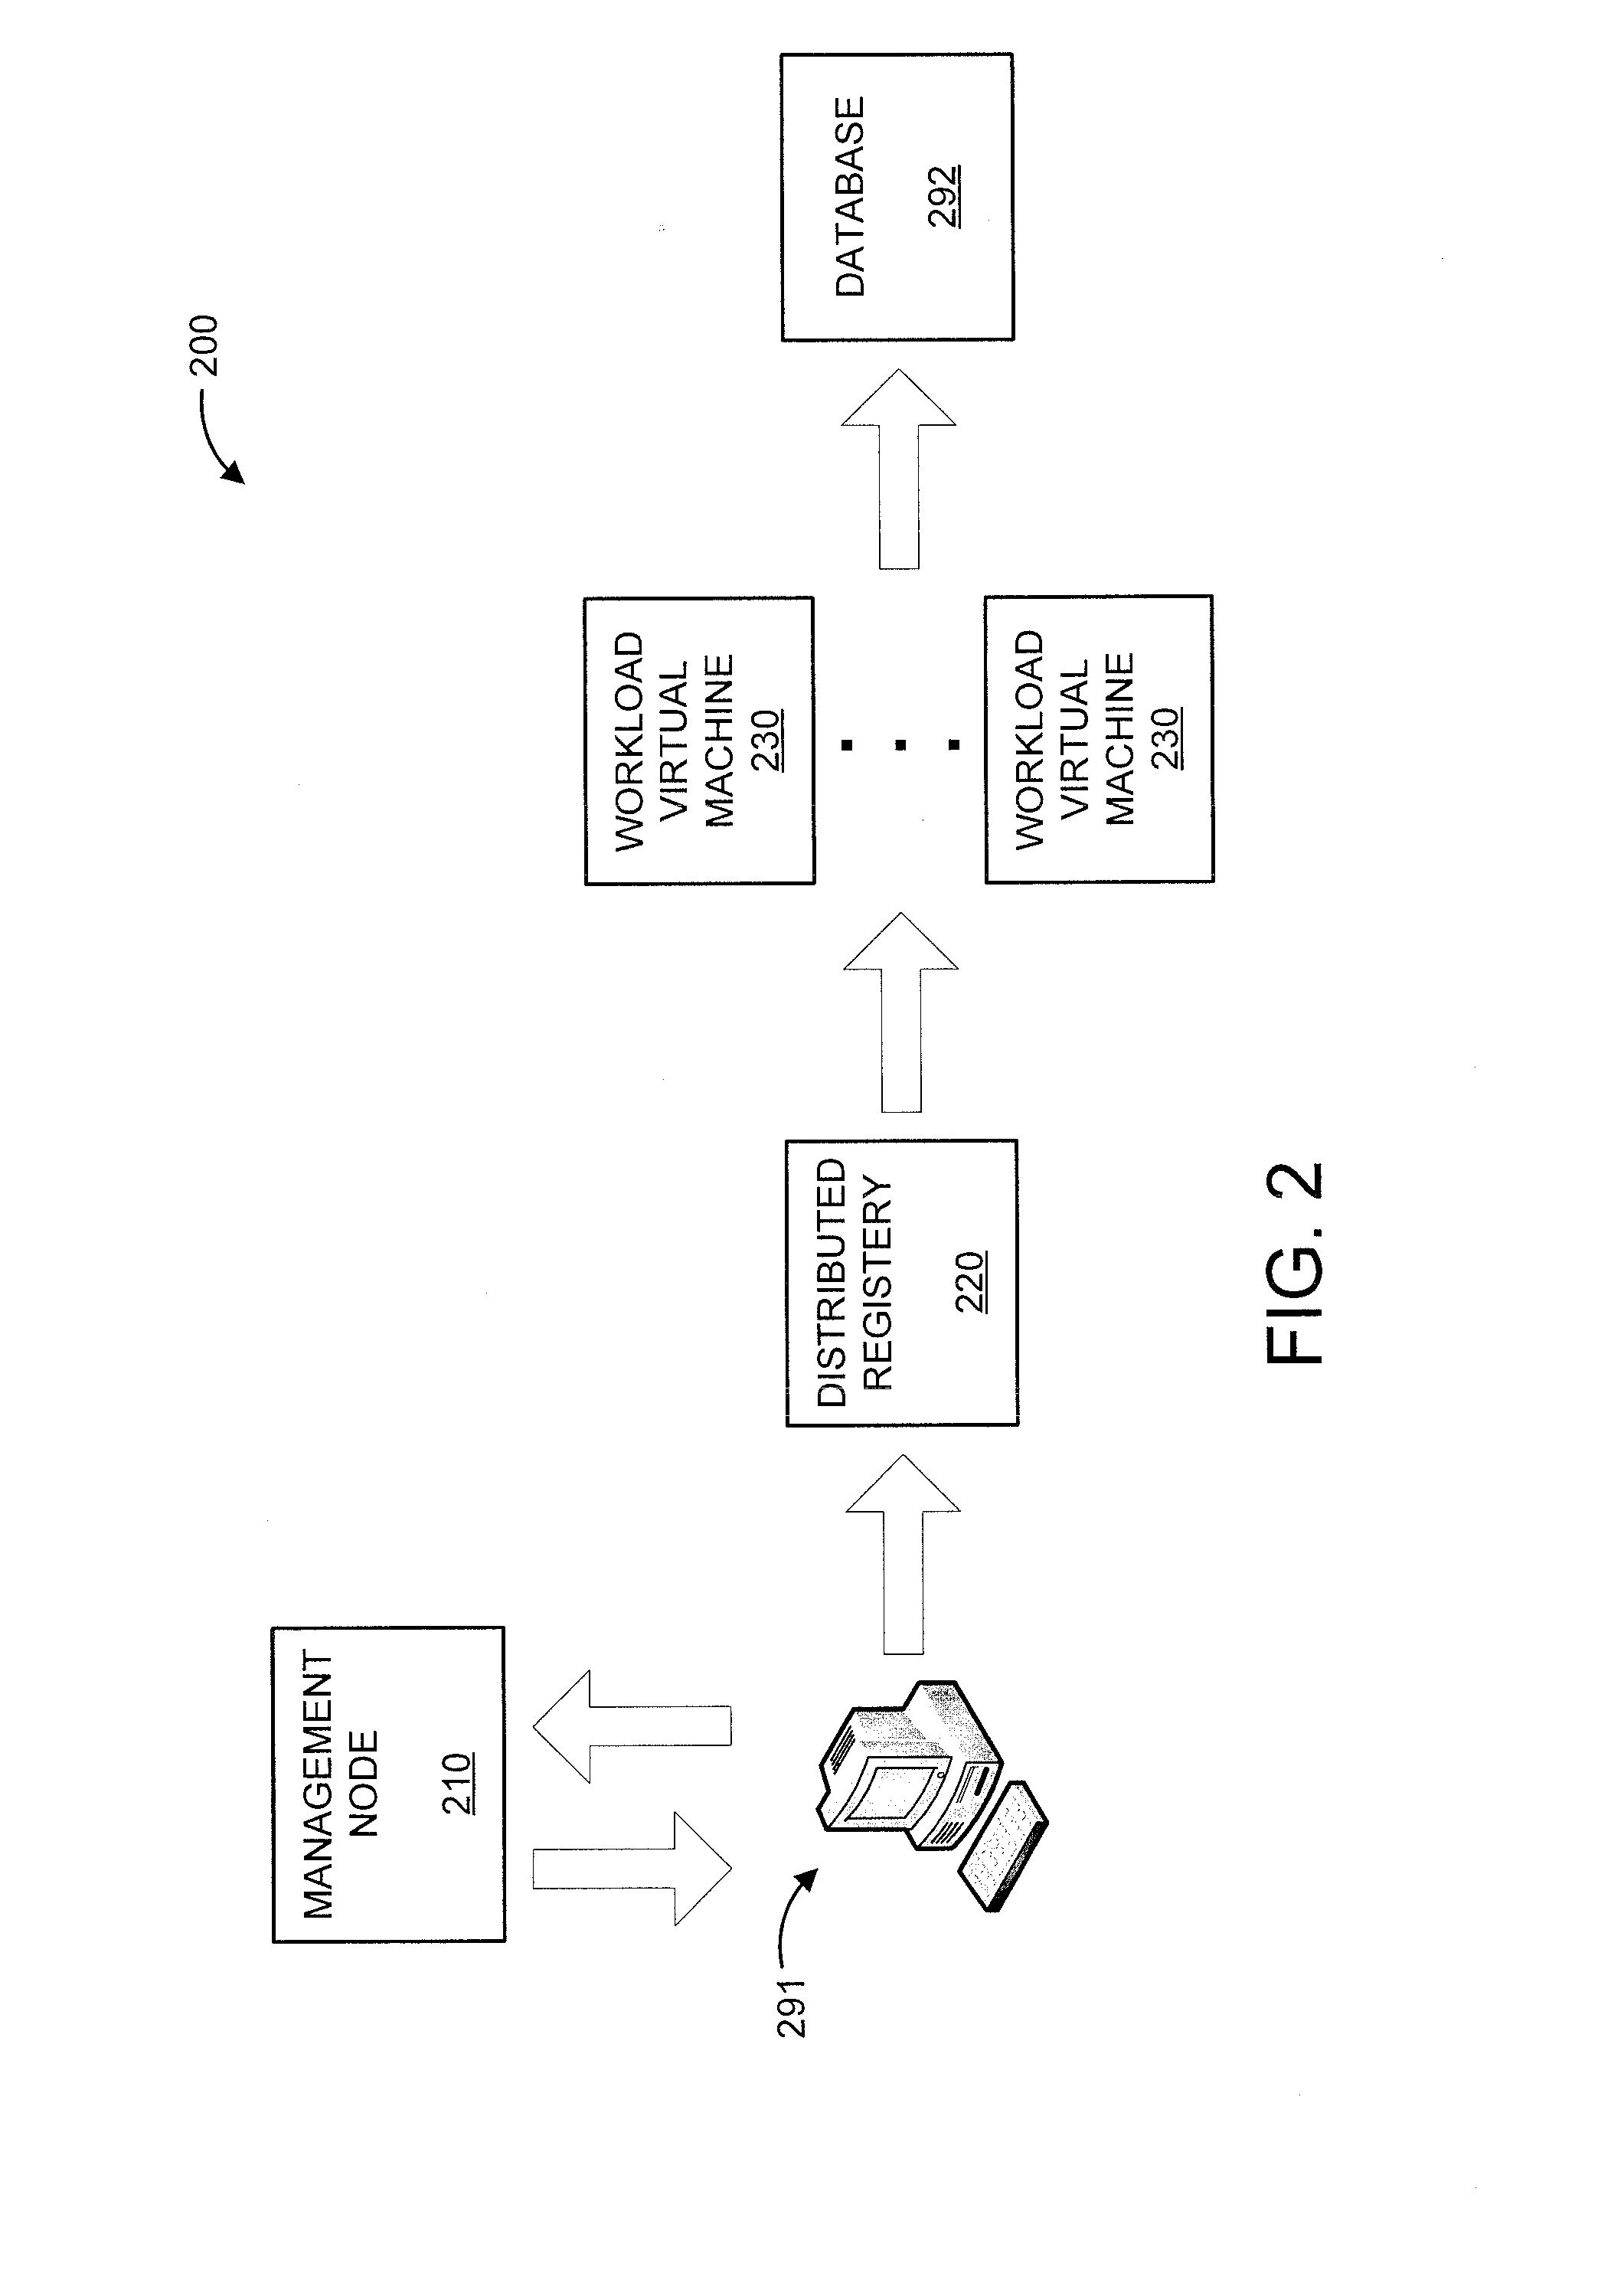 Security maximization for a computer related device based on real-time reaction